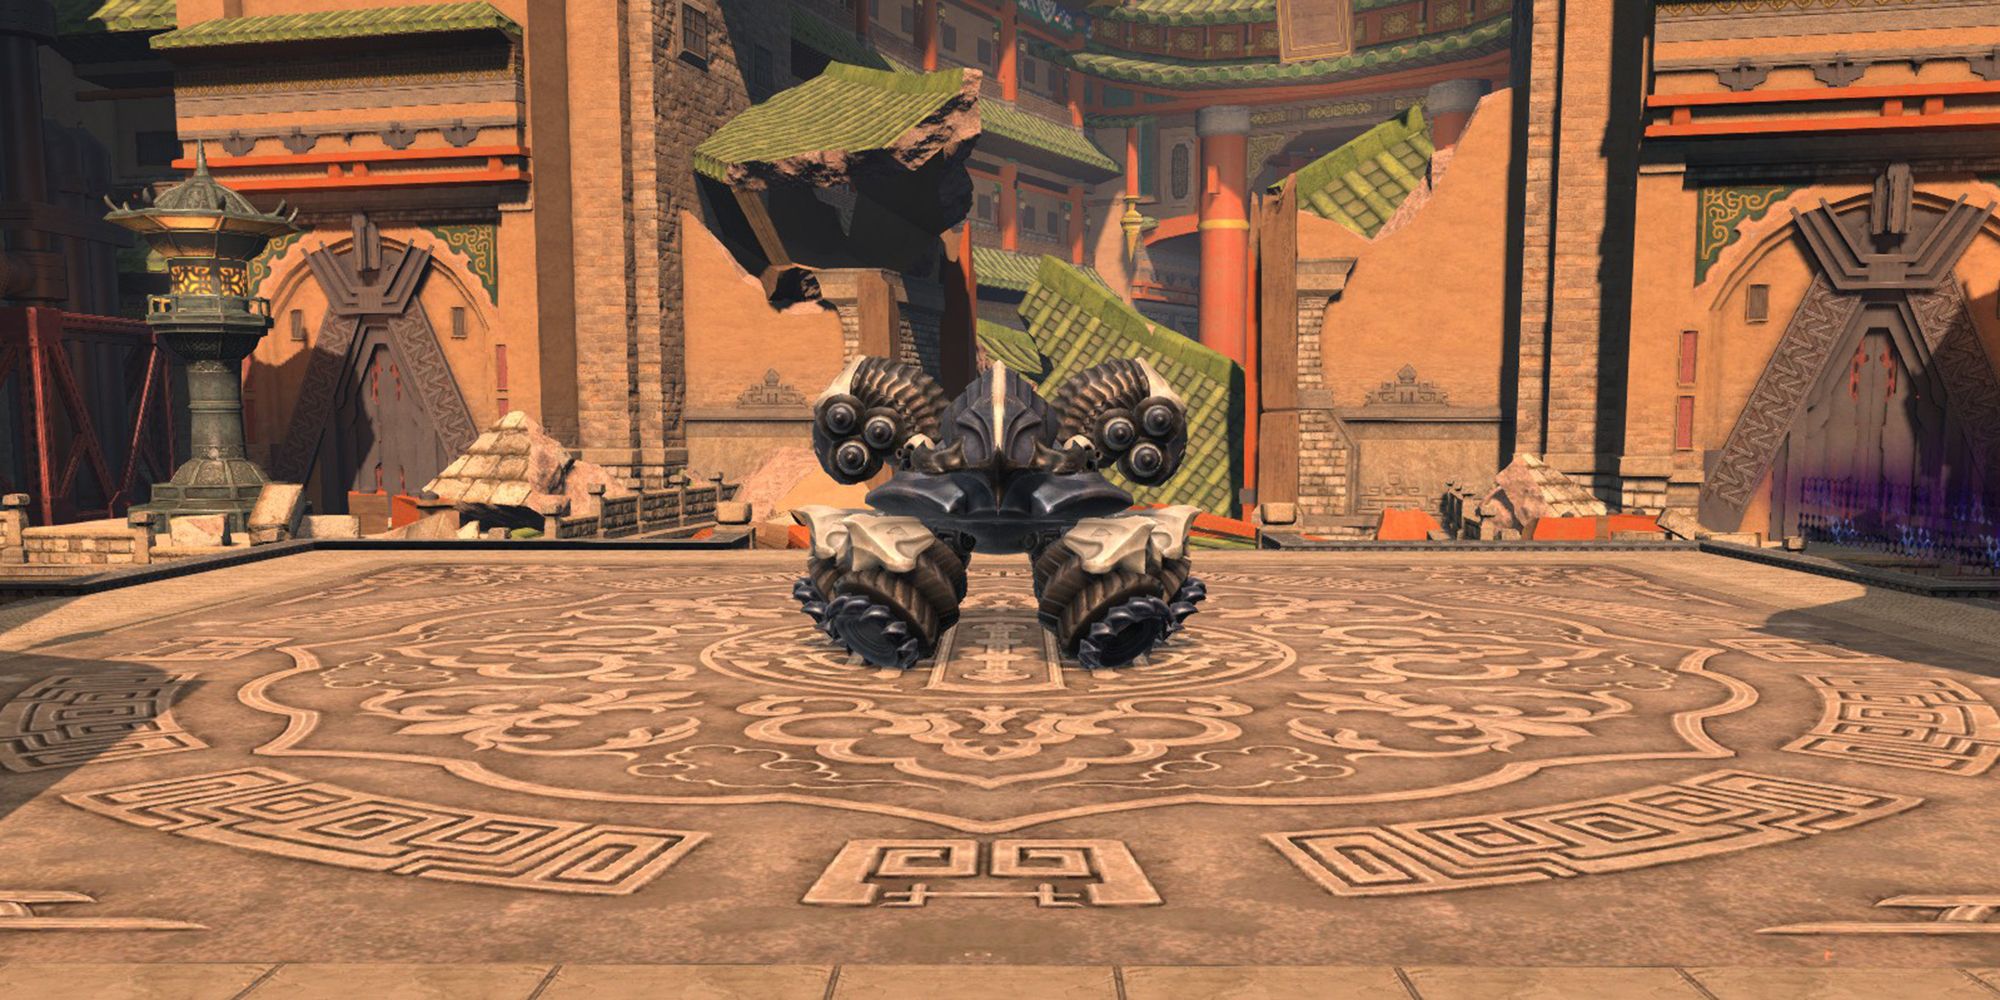 Magitek Hexadrone, the second boss of the Doma Castle dungeon